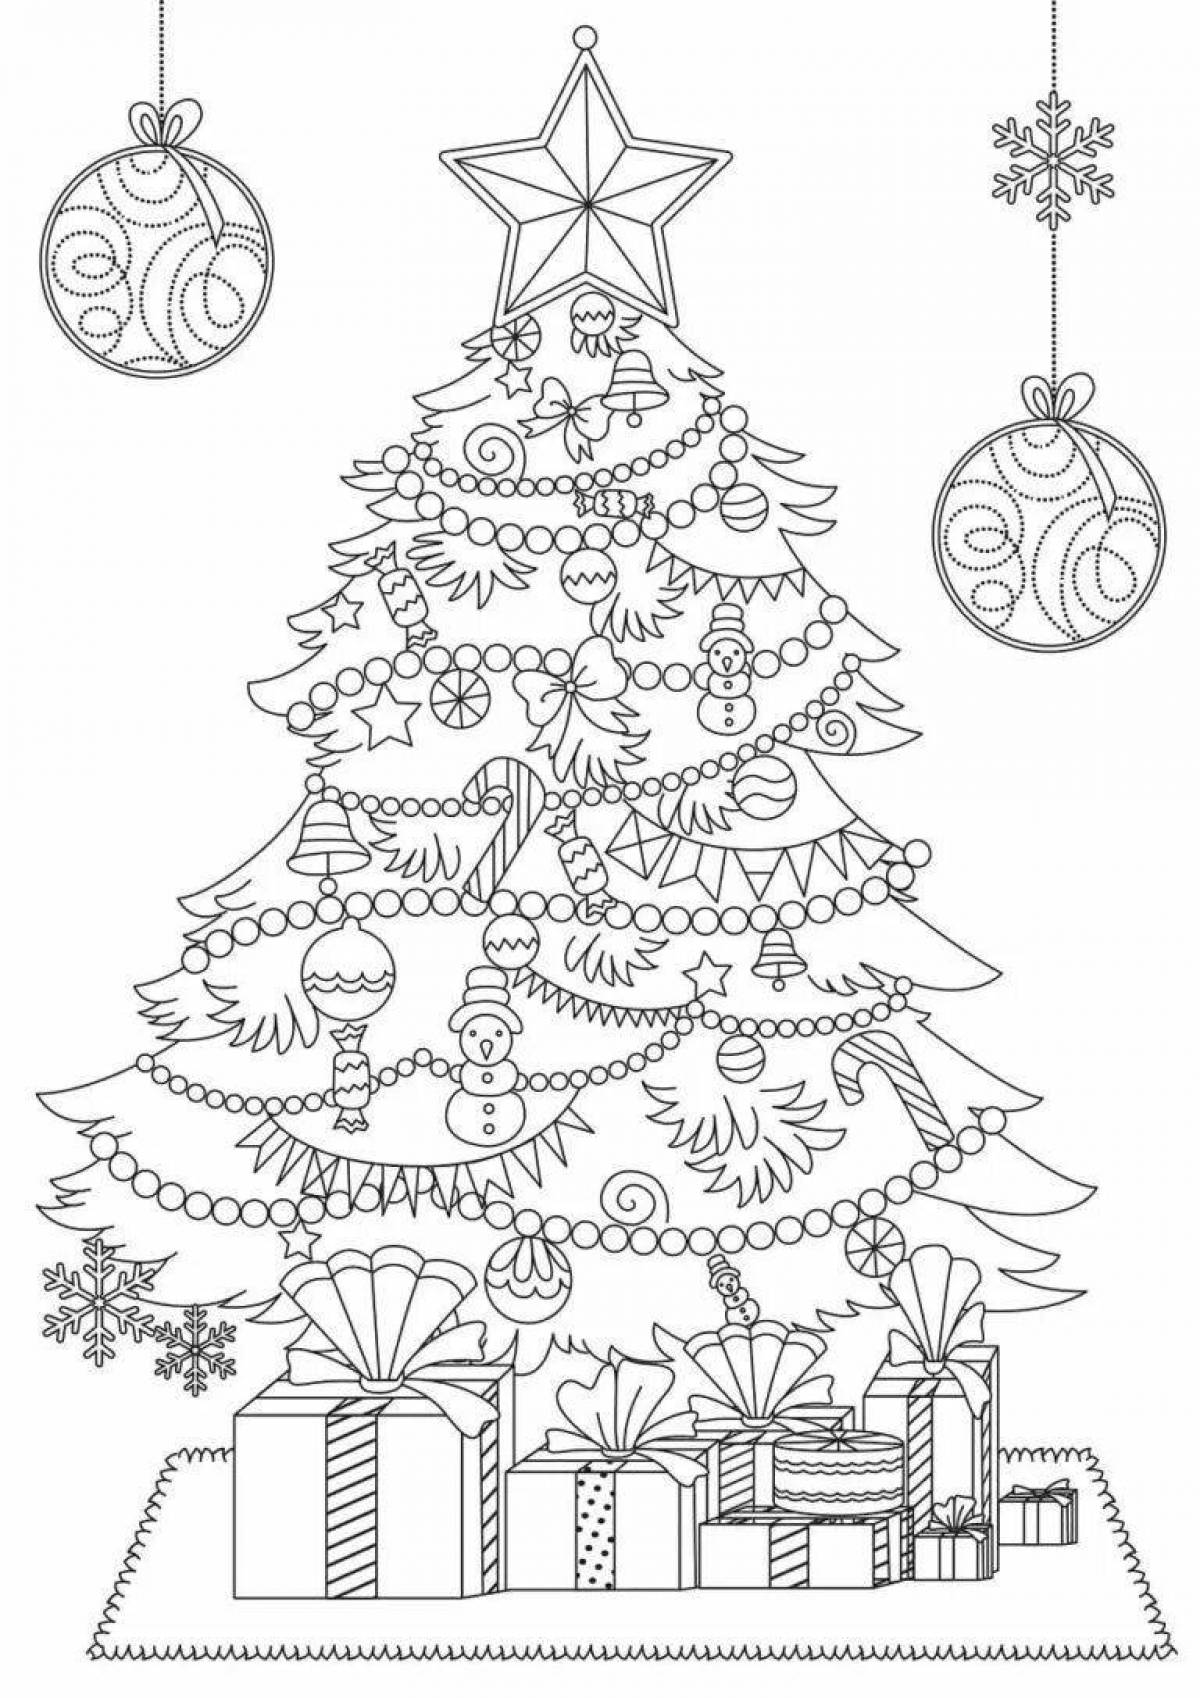 Fabulous Christmas tree coloring book for children 5-6 years old